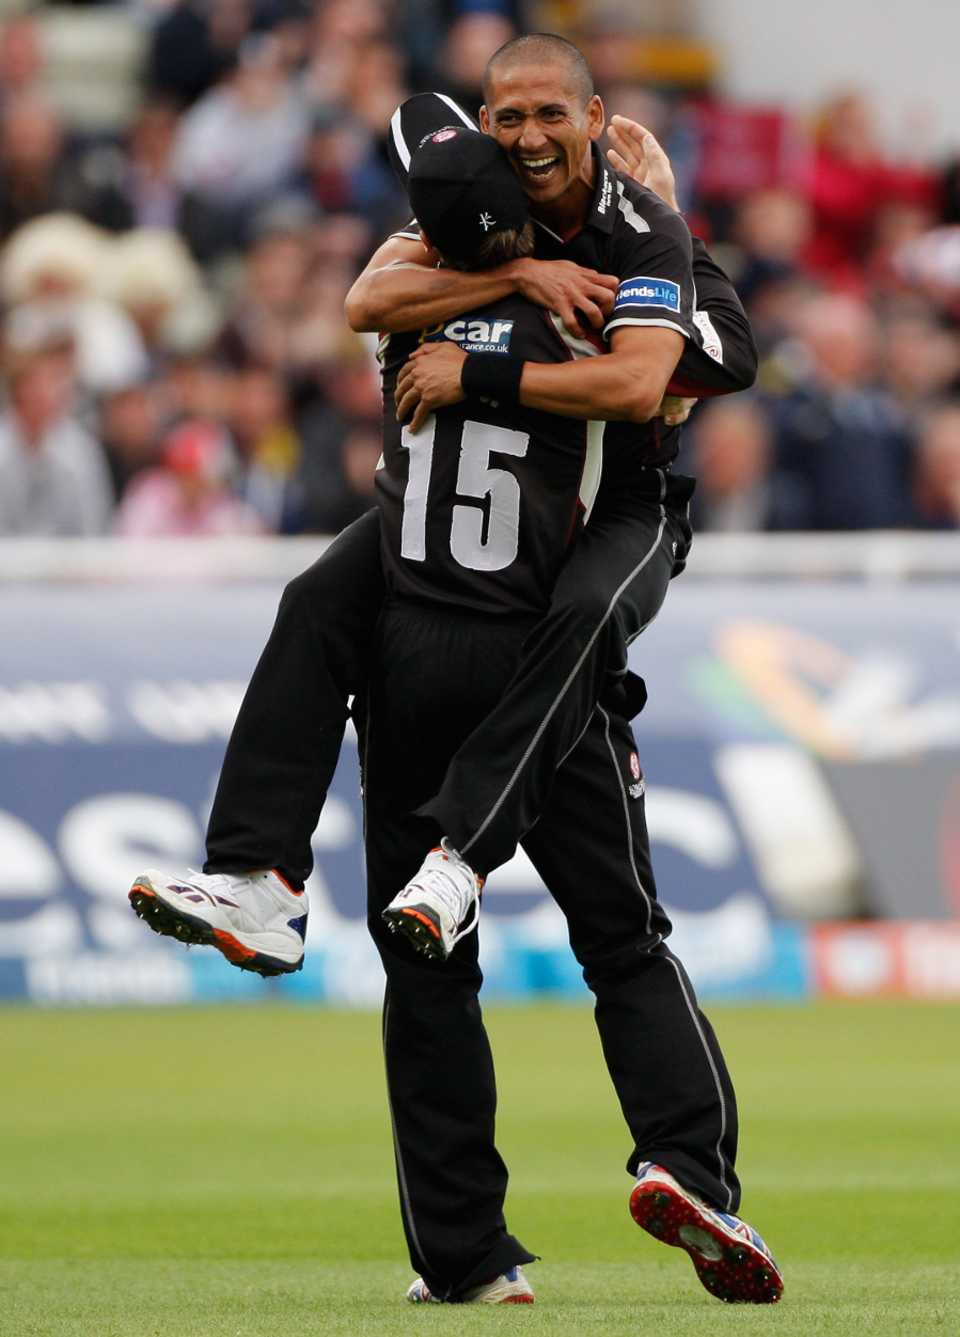 Alfonso Thomas celebrates Somerset's win over Hampshire in the One-over Eliminator